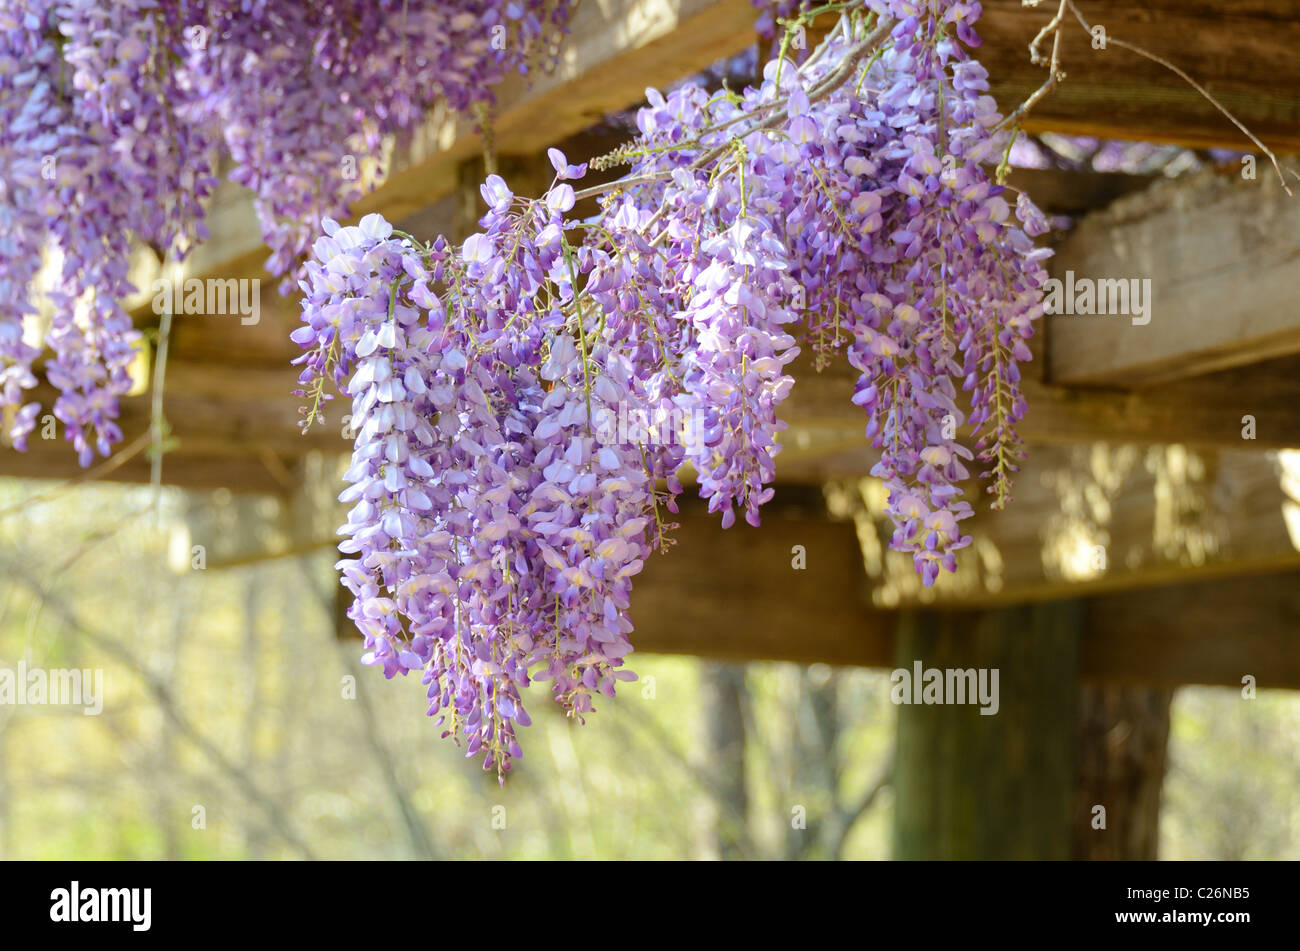 Vines of wisteria hanging off a wood pavilion Stock Photo